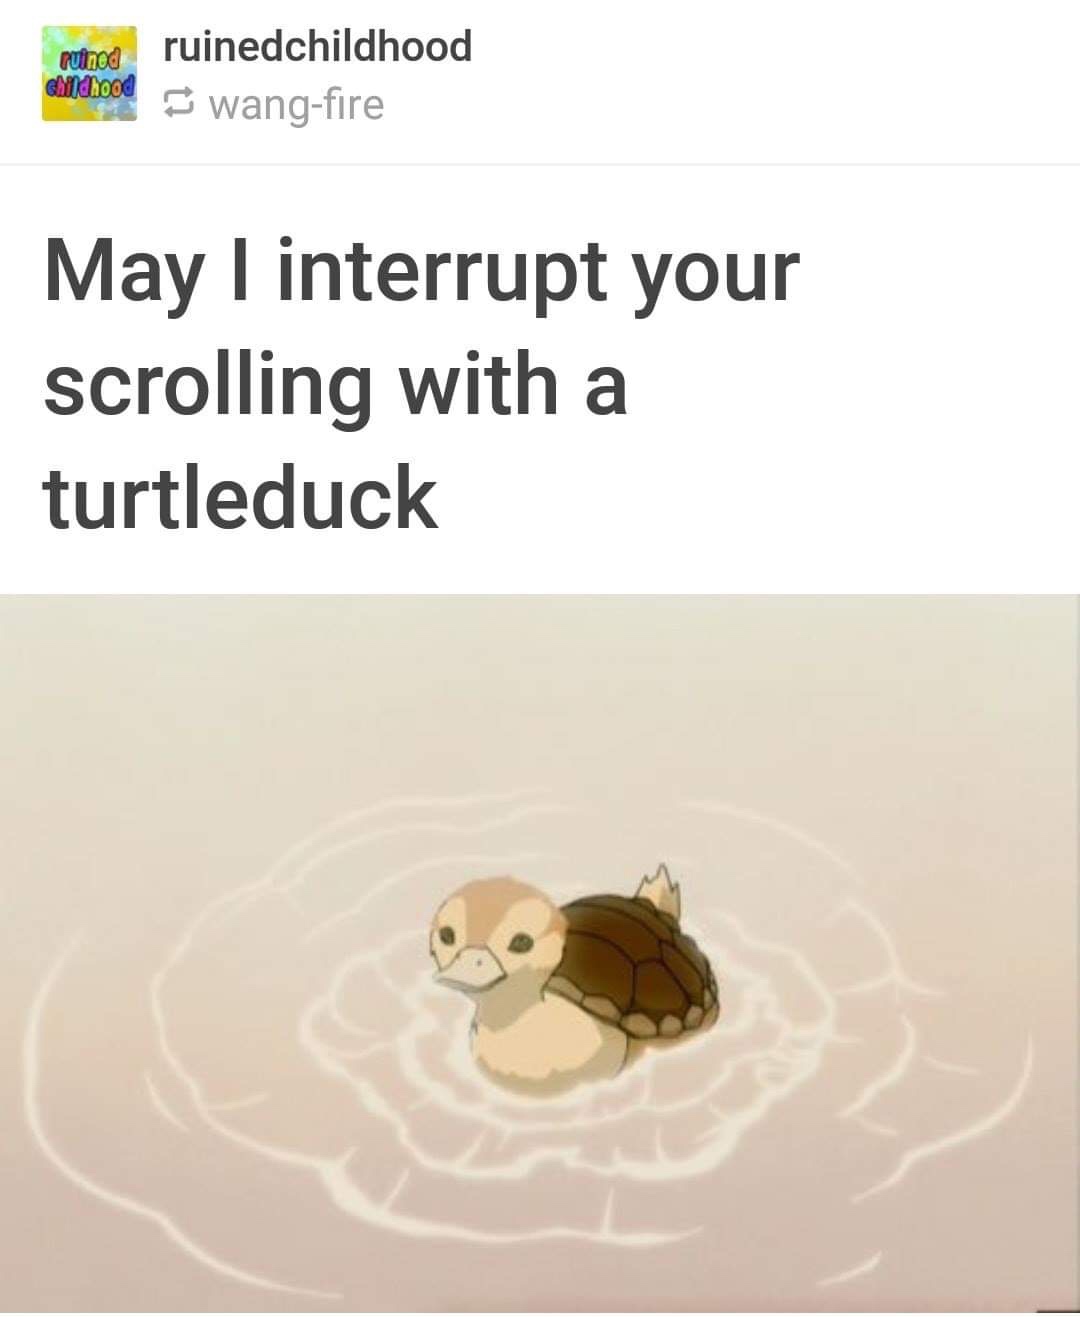 turtle duck - punod ruinedchildhood omdrood wangfire May I interrupt your scrolling with a turtleduck